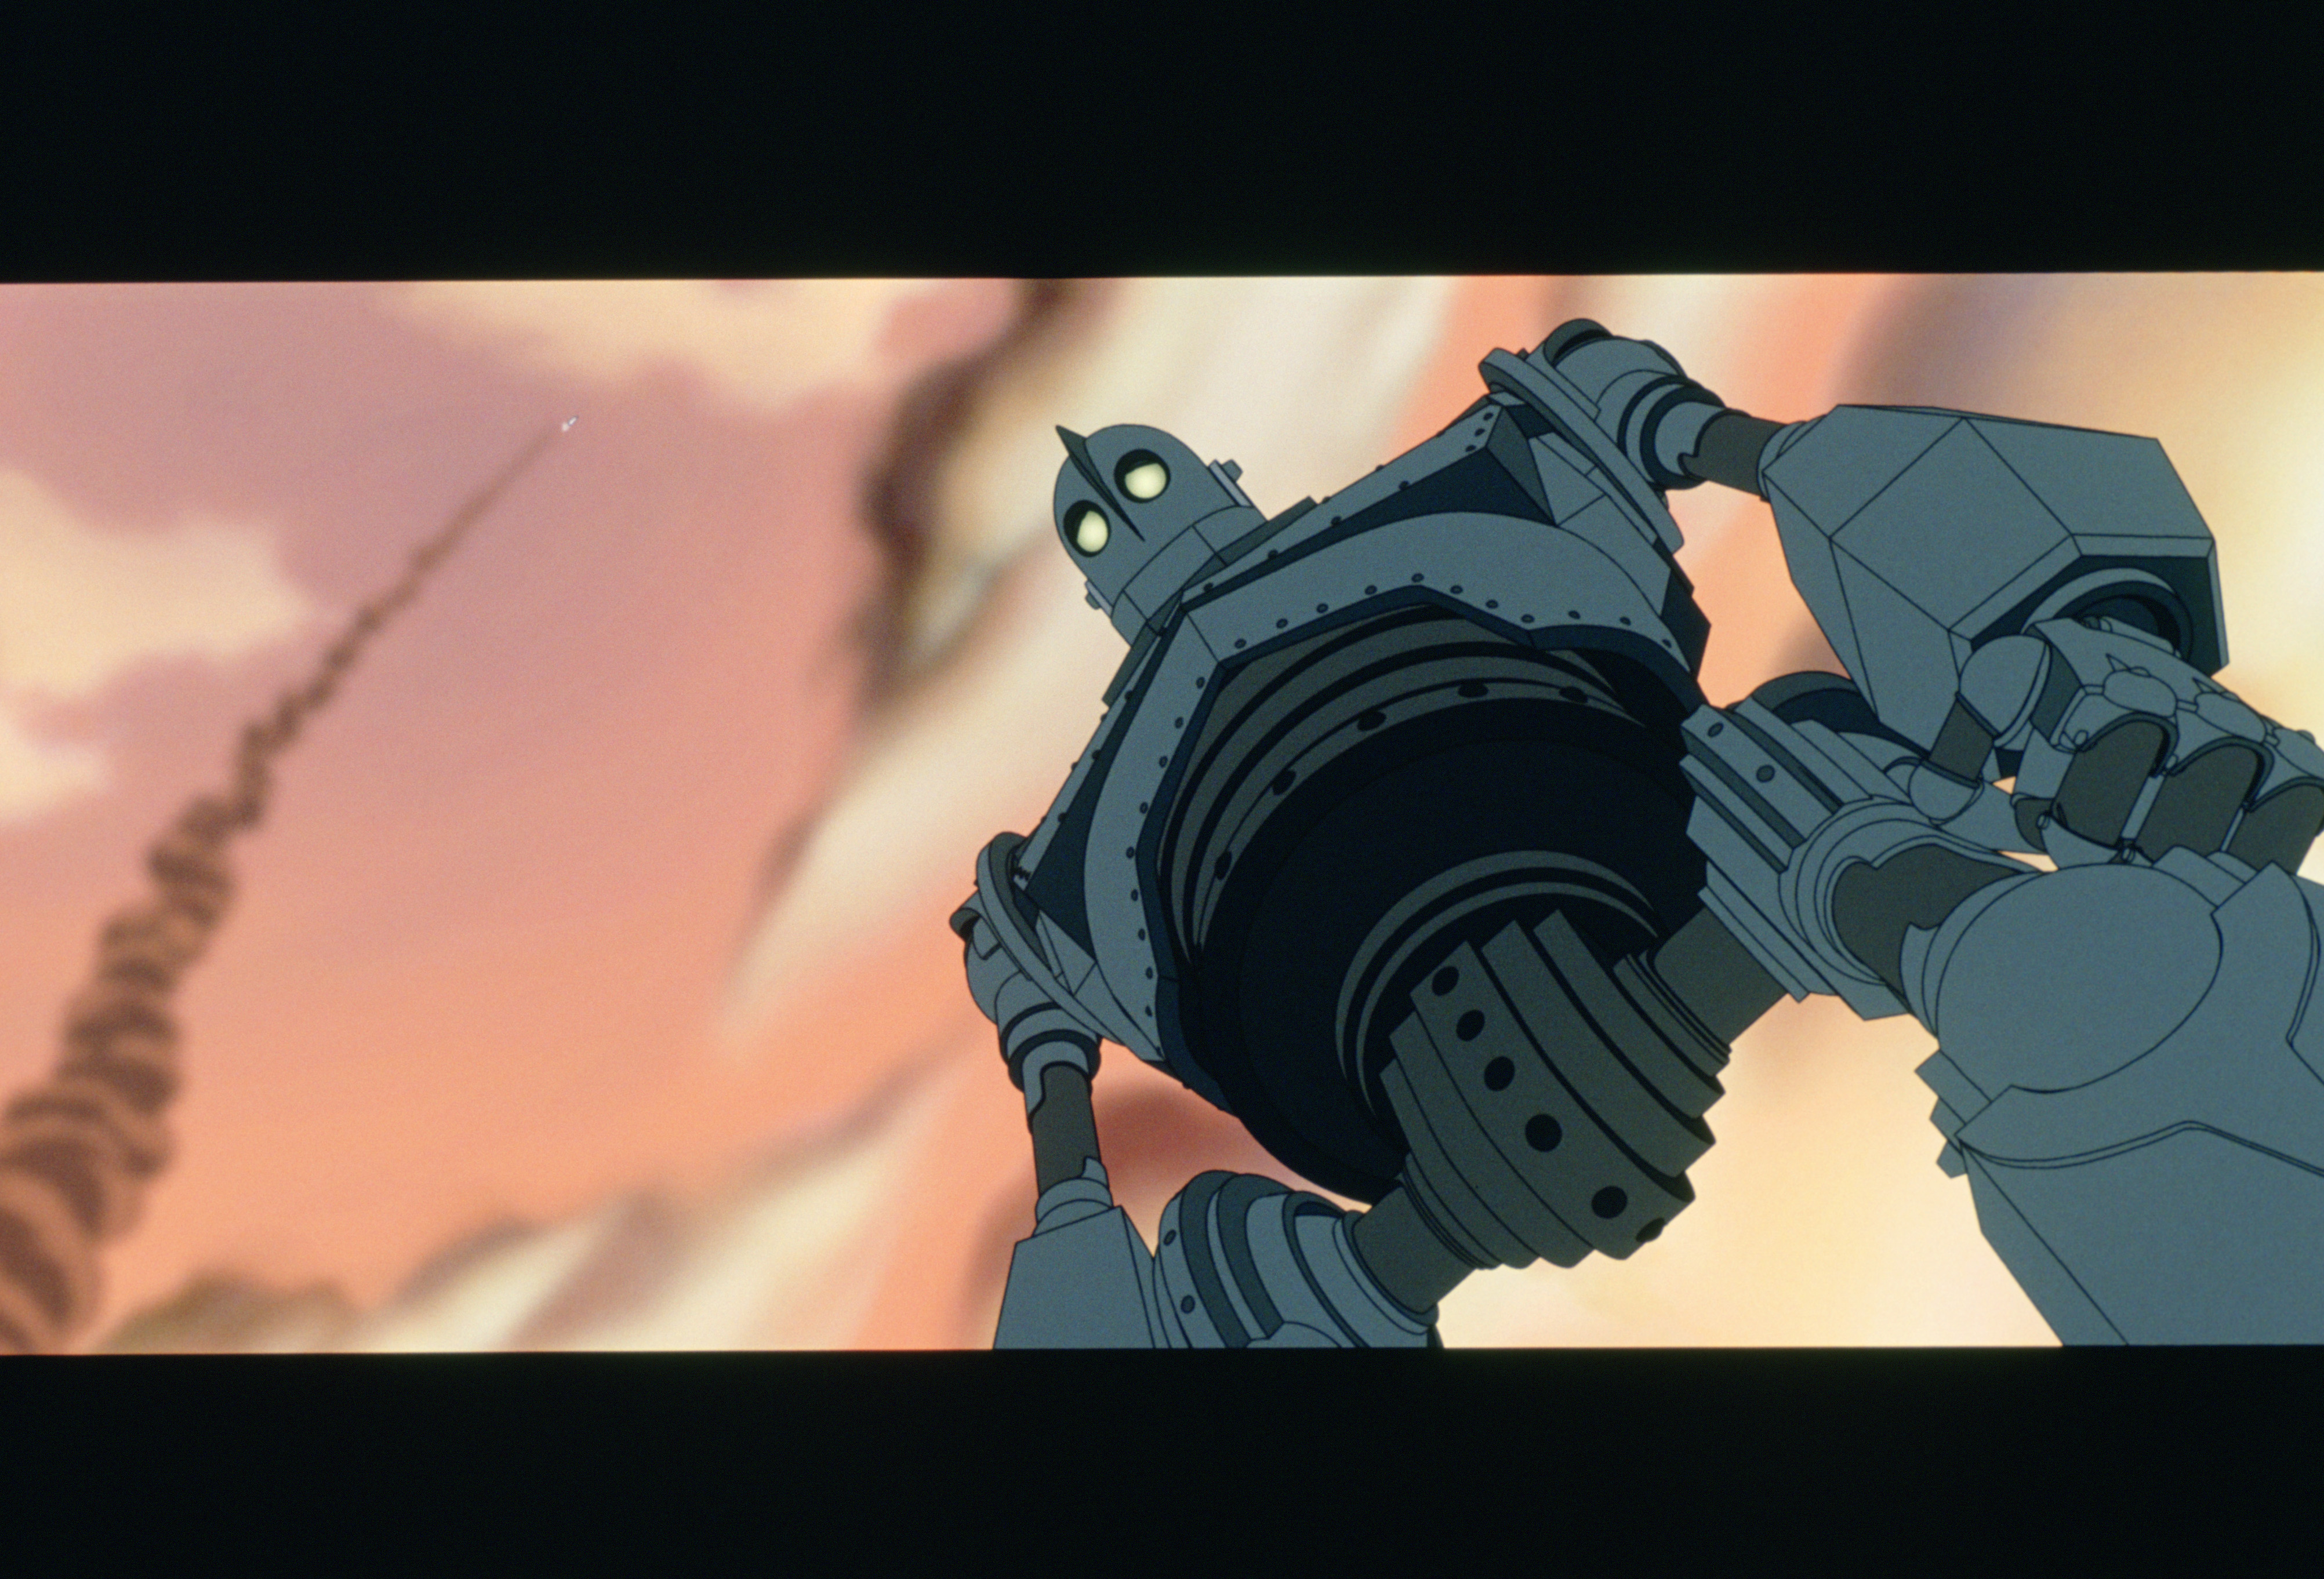 Vin Diesel in The Iron Giant (1999)